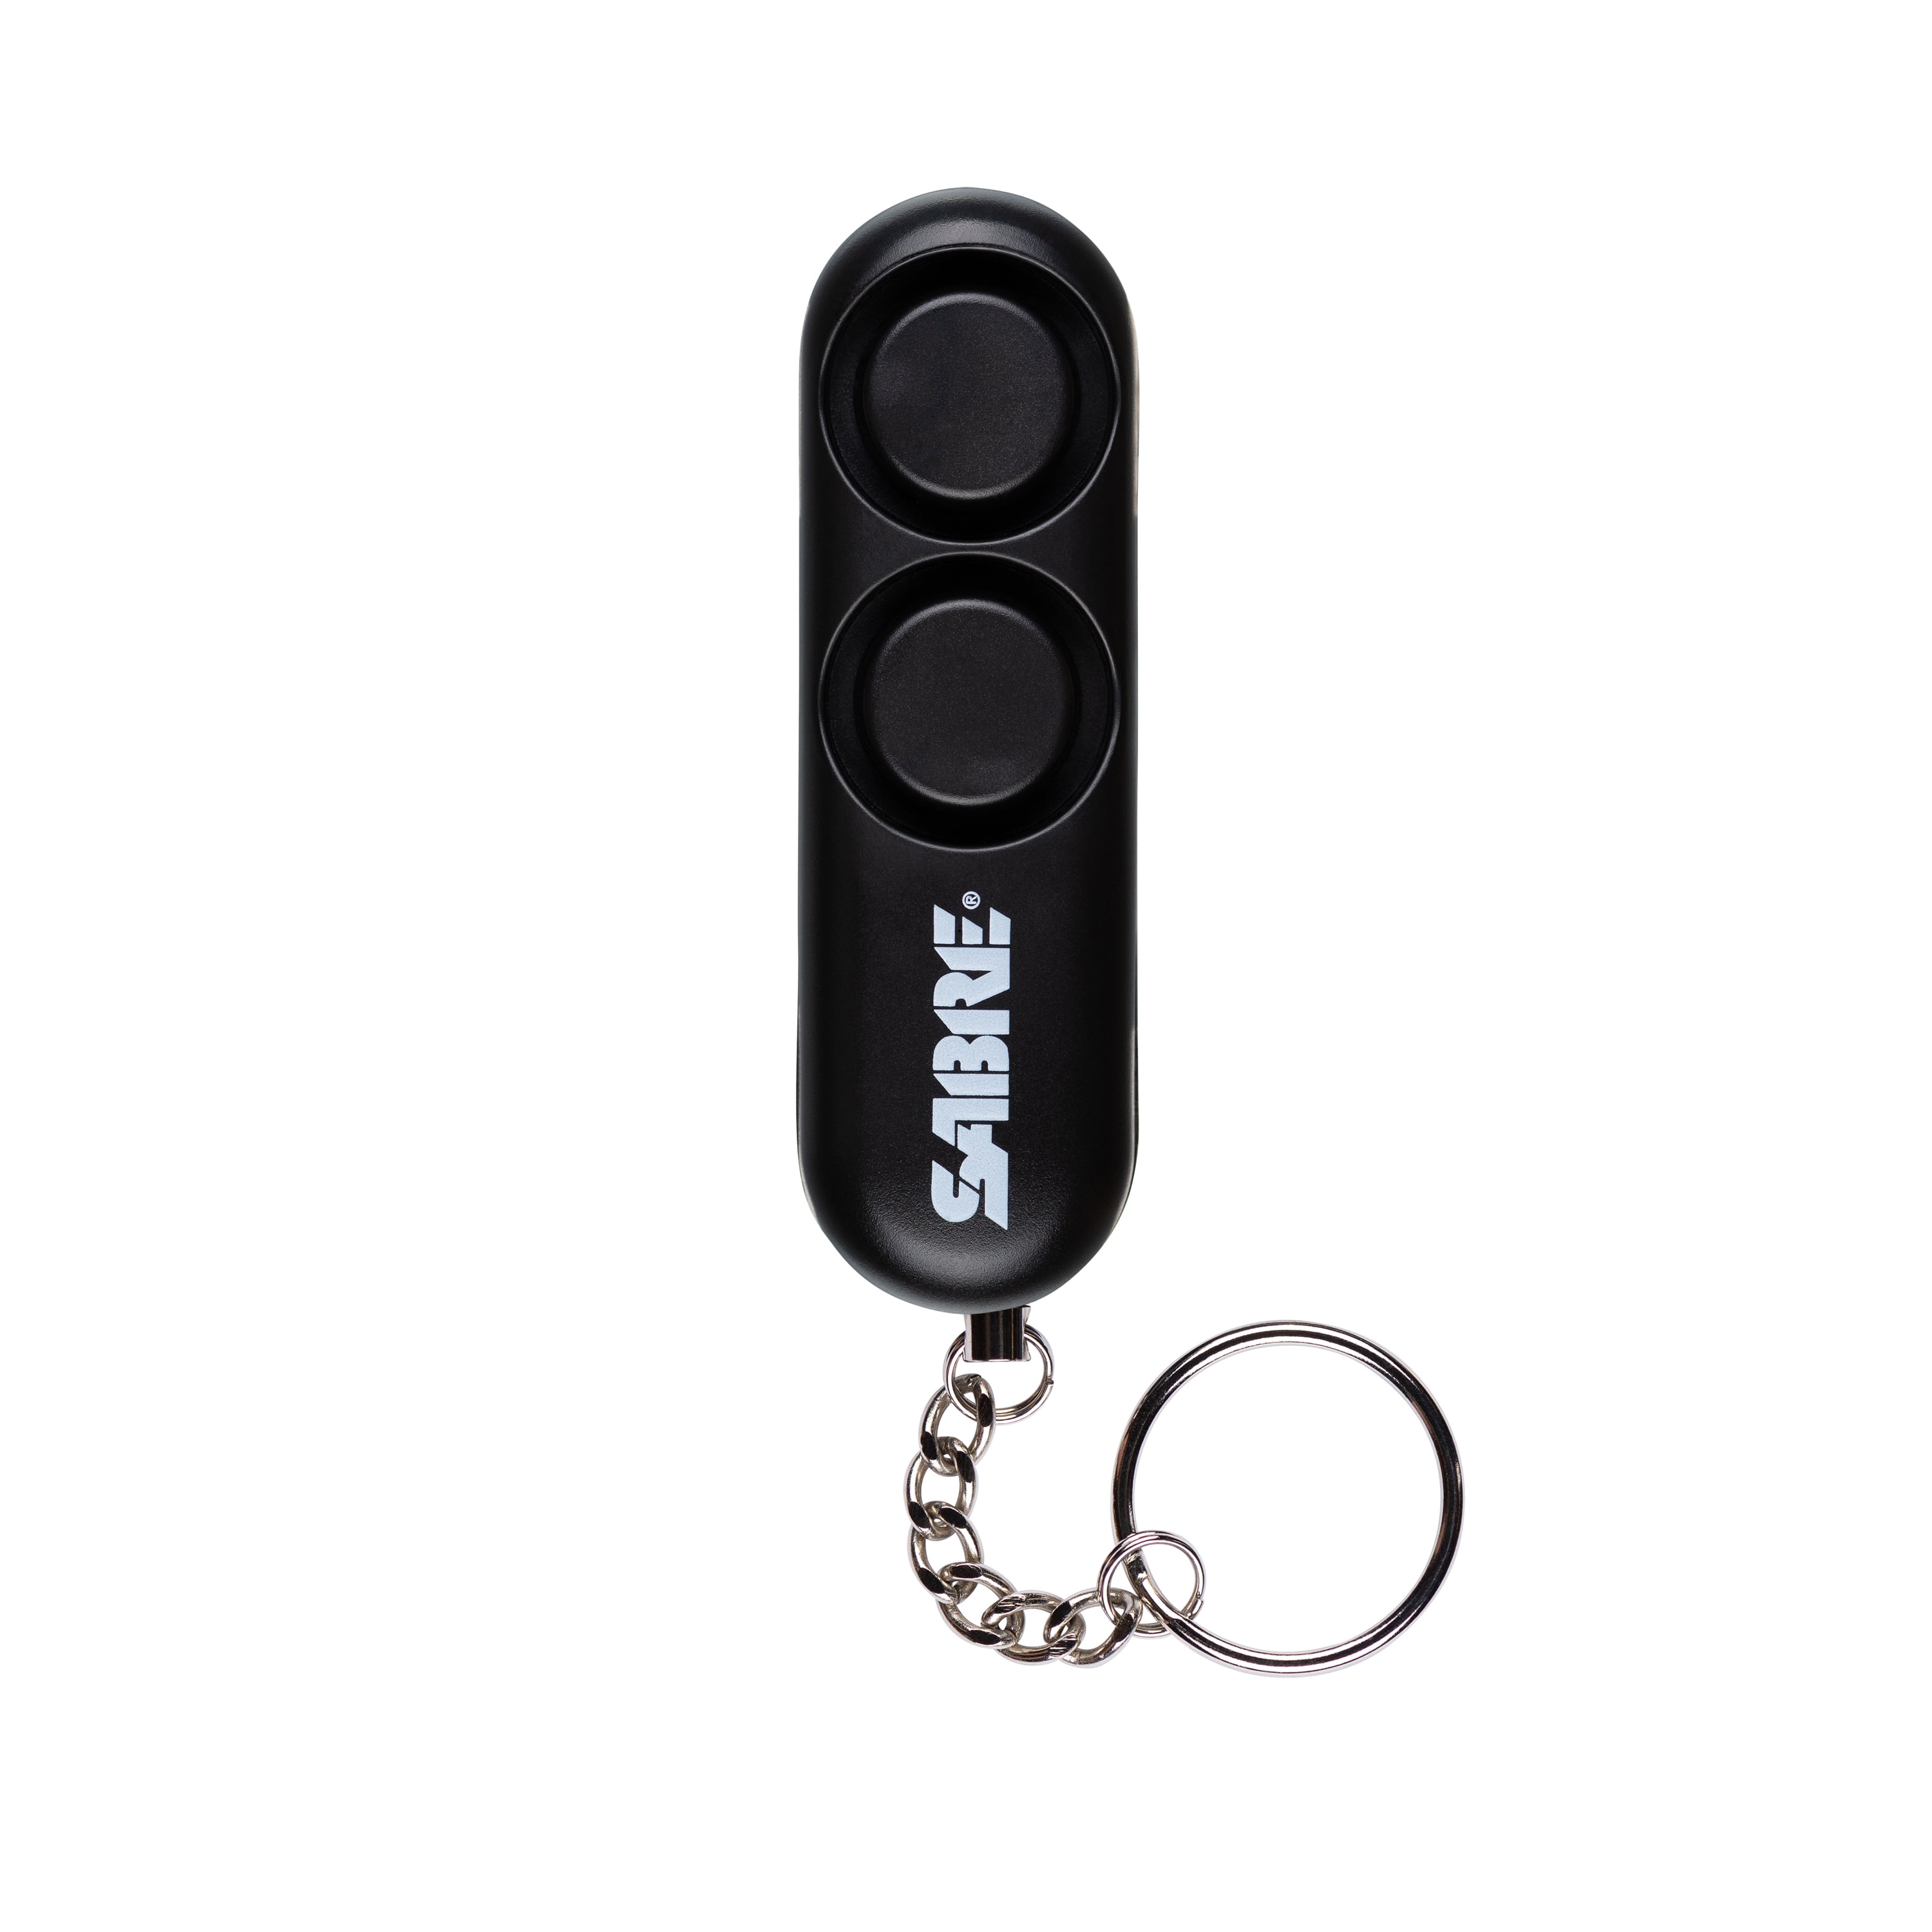 SABRE Safety Kit with Pepper Spray and Key Chain Personal Alarm, Black,  Solid Print, 0.3 lb. 